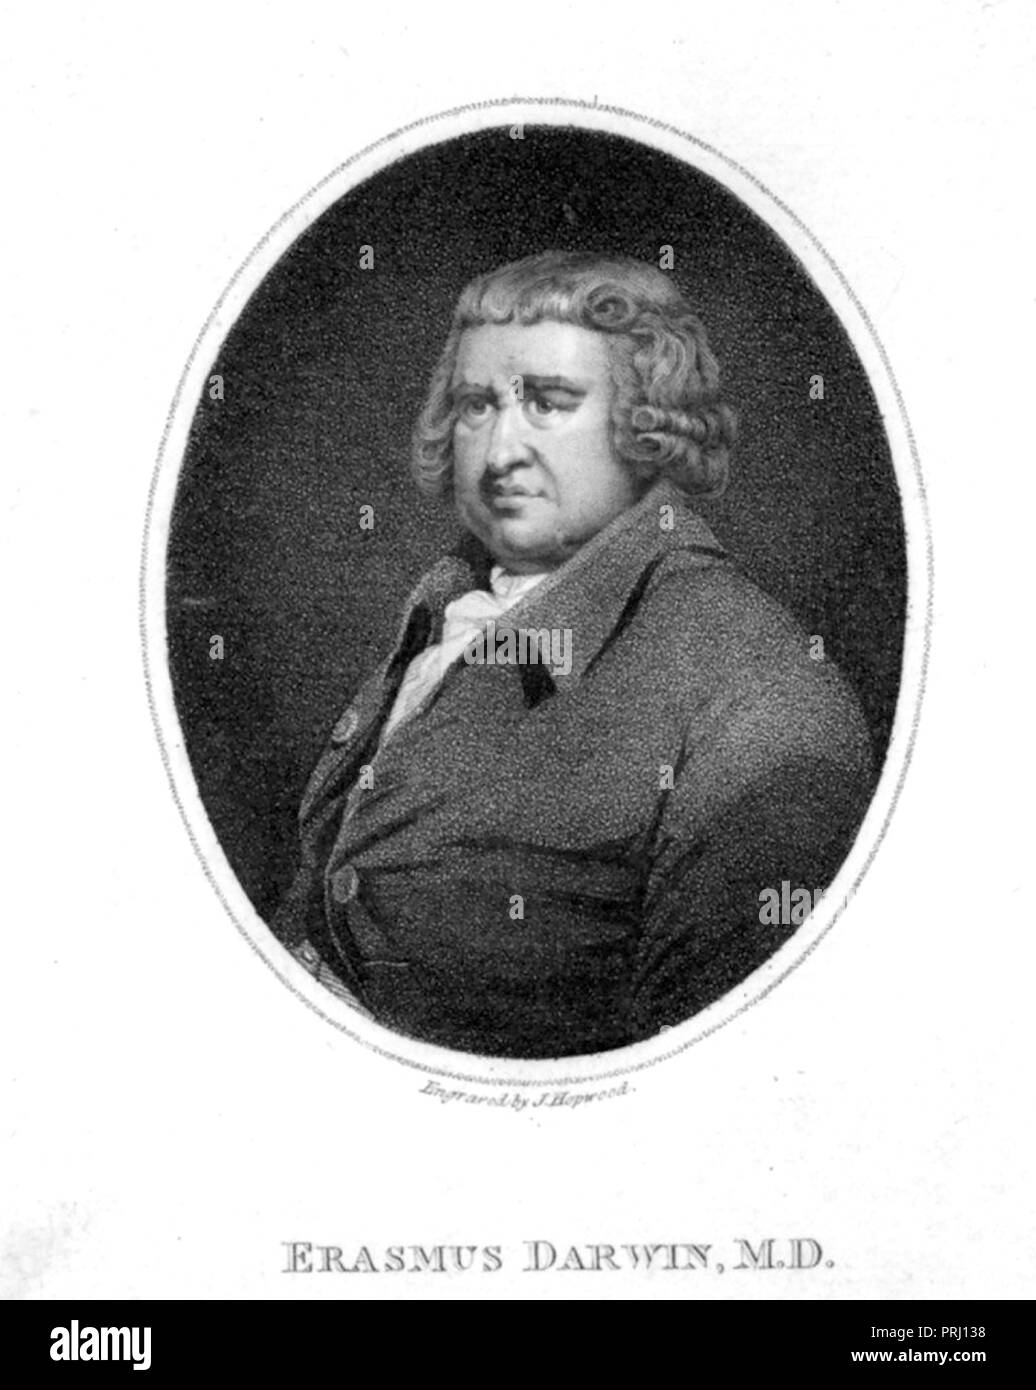 ERASMUS DARWIN (1731-1802) English physician, abolitionist and inventor, father of Charles Darwin. Engraving after painting by Joseph Wright about 1792 Stock Photo